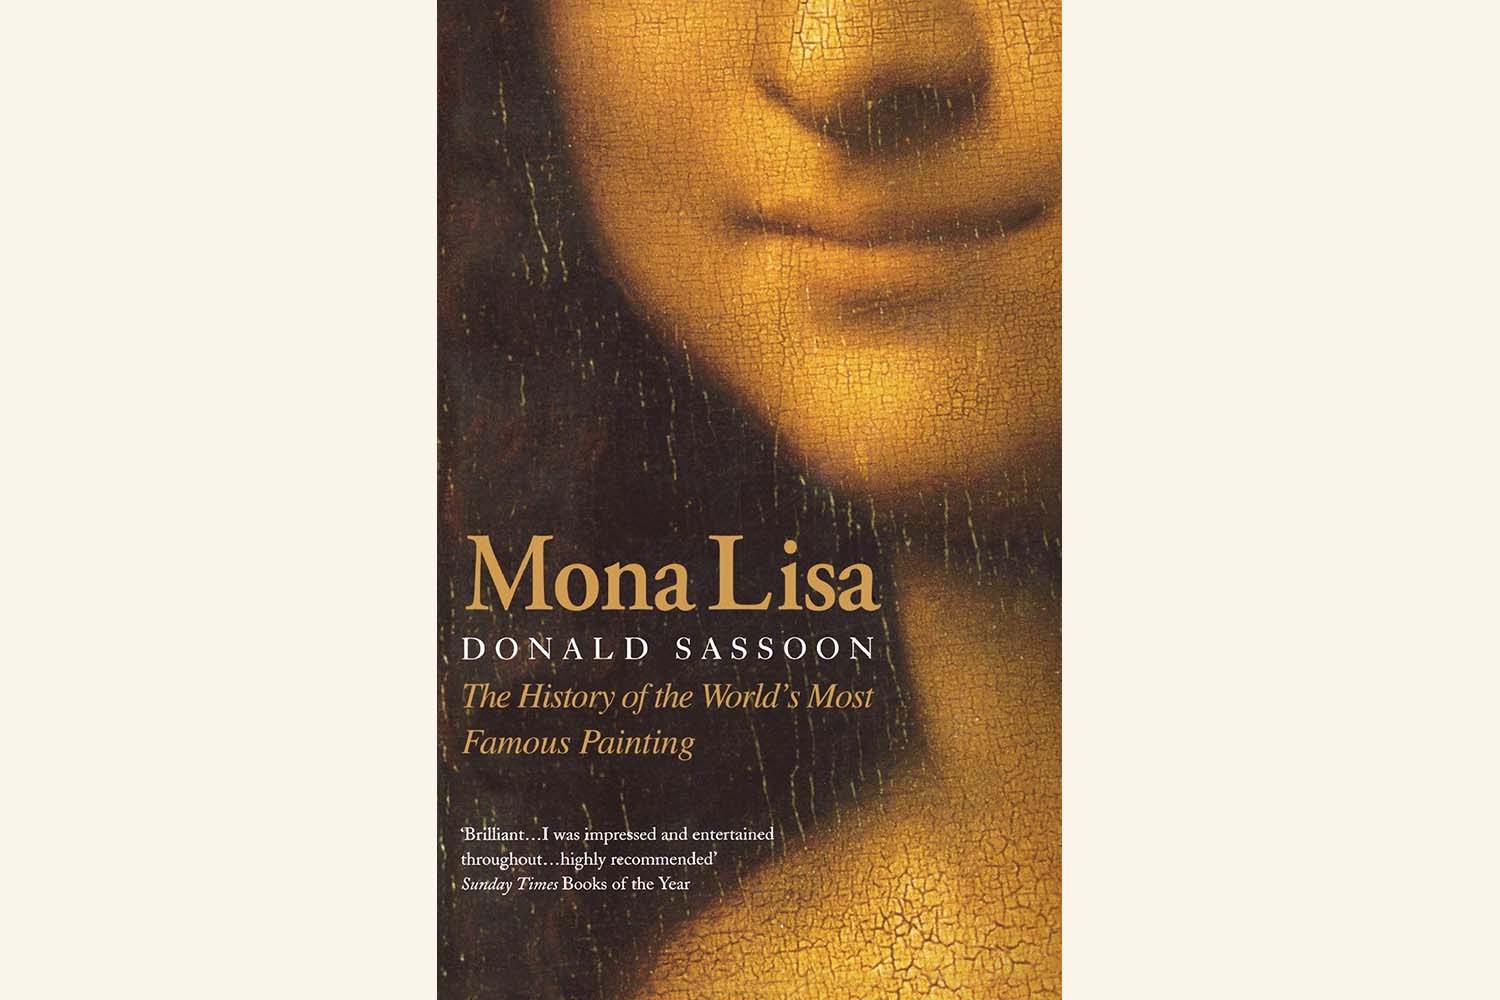 Mona Lisa: The Story of the World's Most Famous Painting, by Donald Sassoon